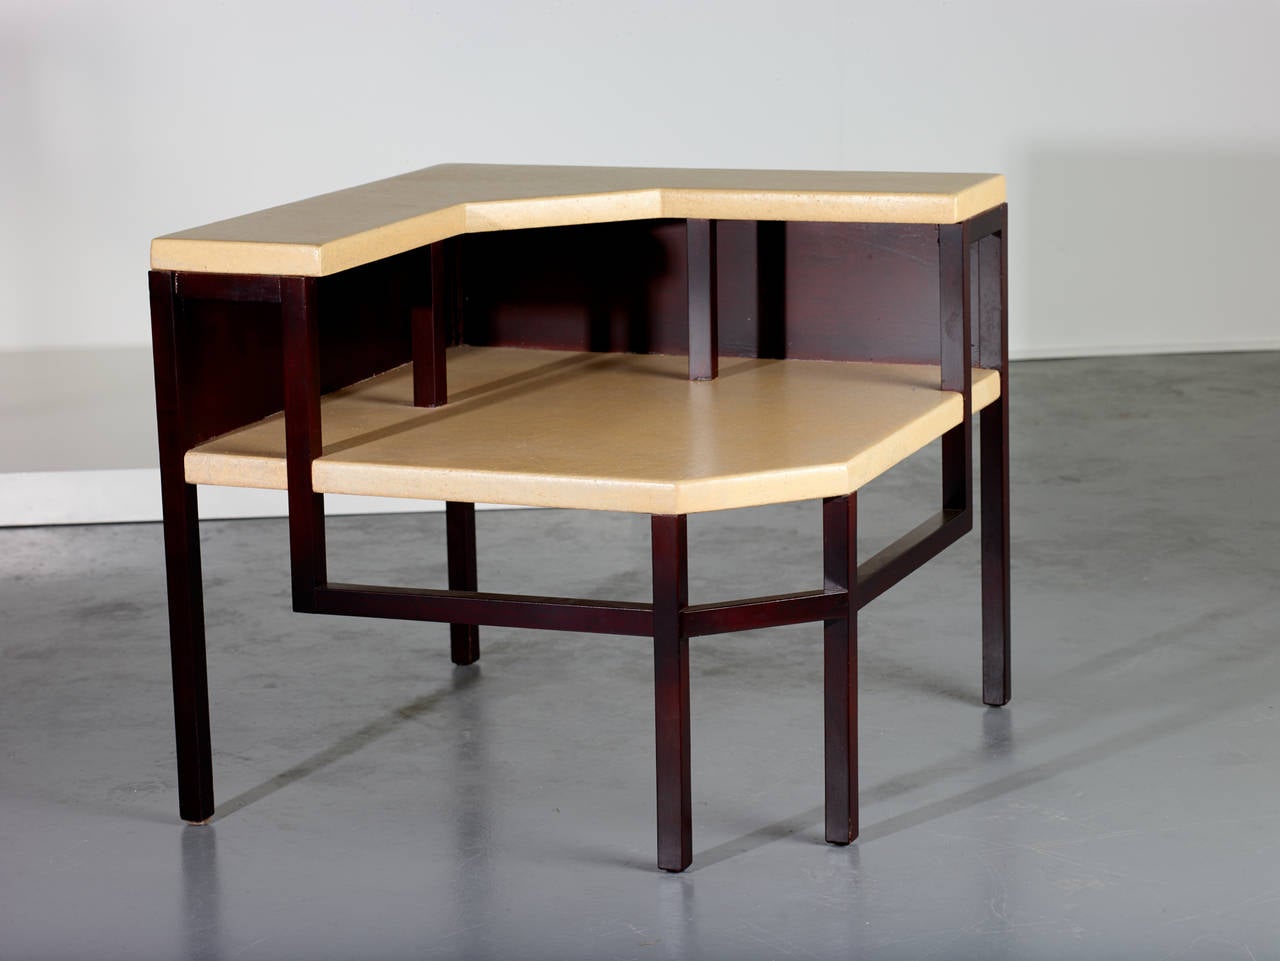 Paul Frankl Corner Tables, Lacquered Cork and Mahogany, 1951 For Sale 2